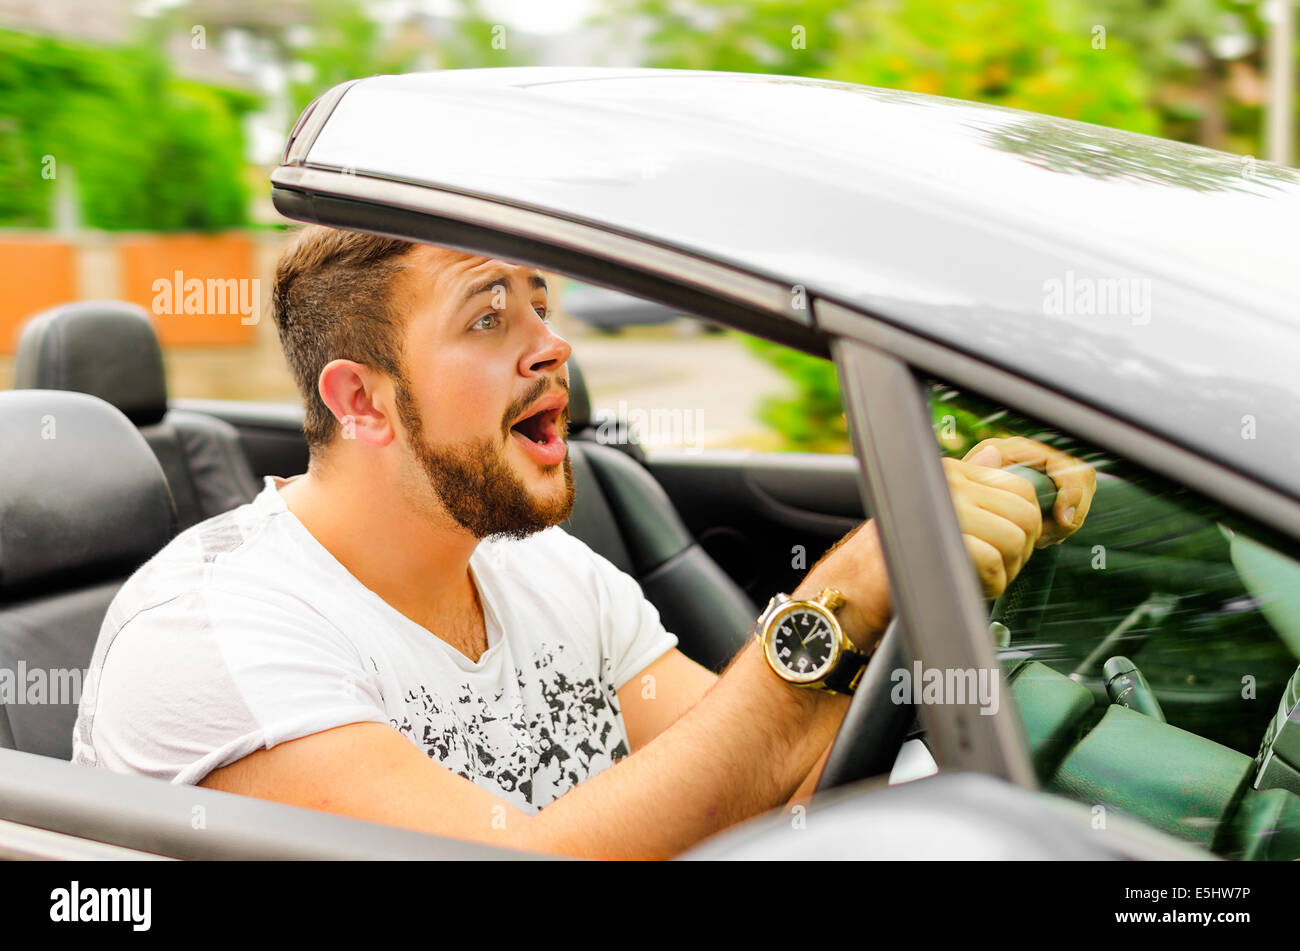 Fright face of man driving car and strongly hold the wheel Stock Photo